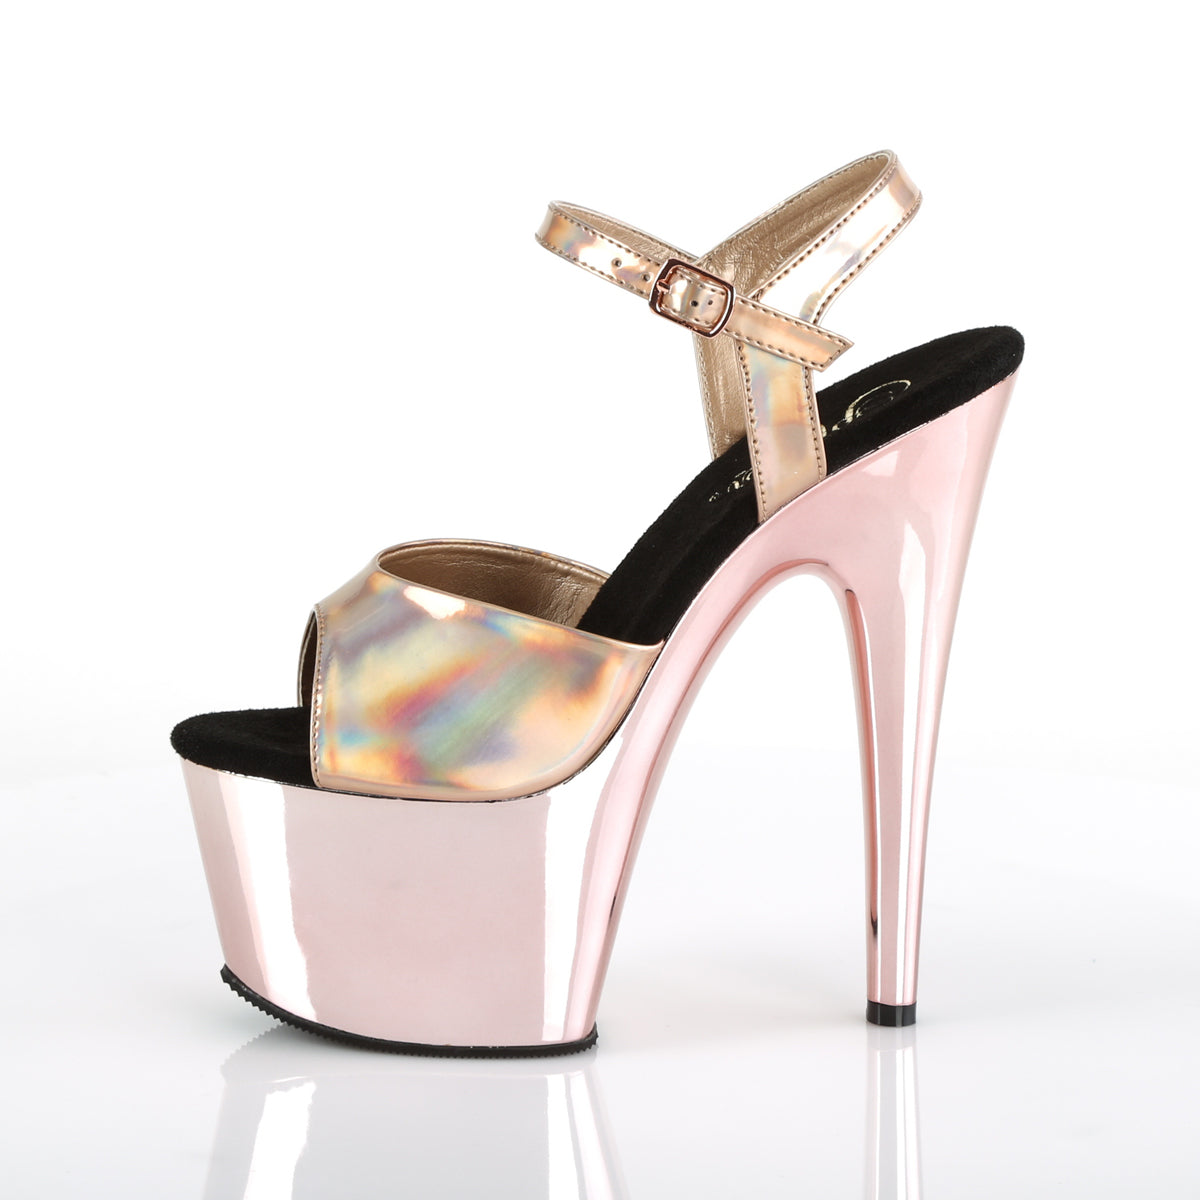 ADORE-709HGCH 7" Heel Rose Gold Holo Sexy Sandals-Pleaser- Sexy Shoes Pole Dance Heels